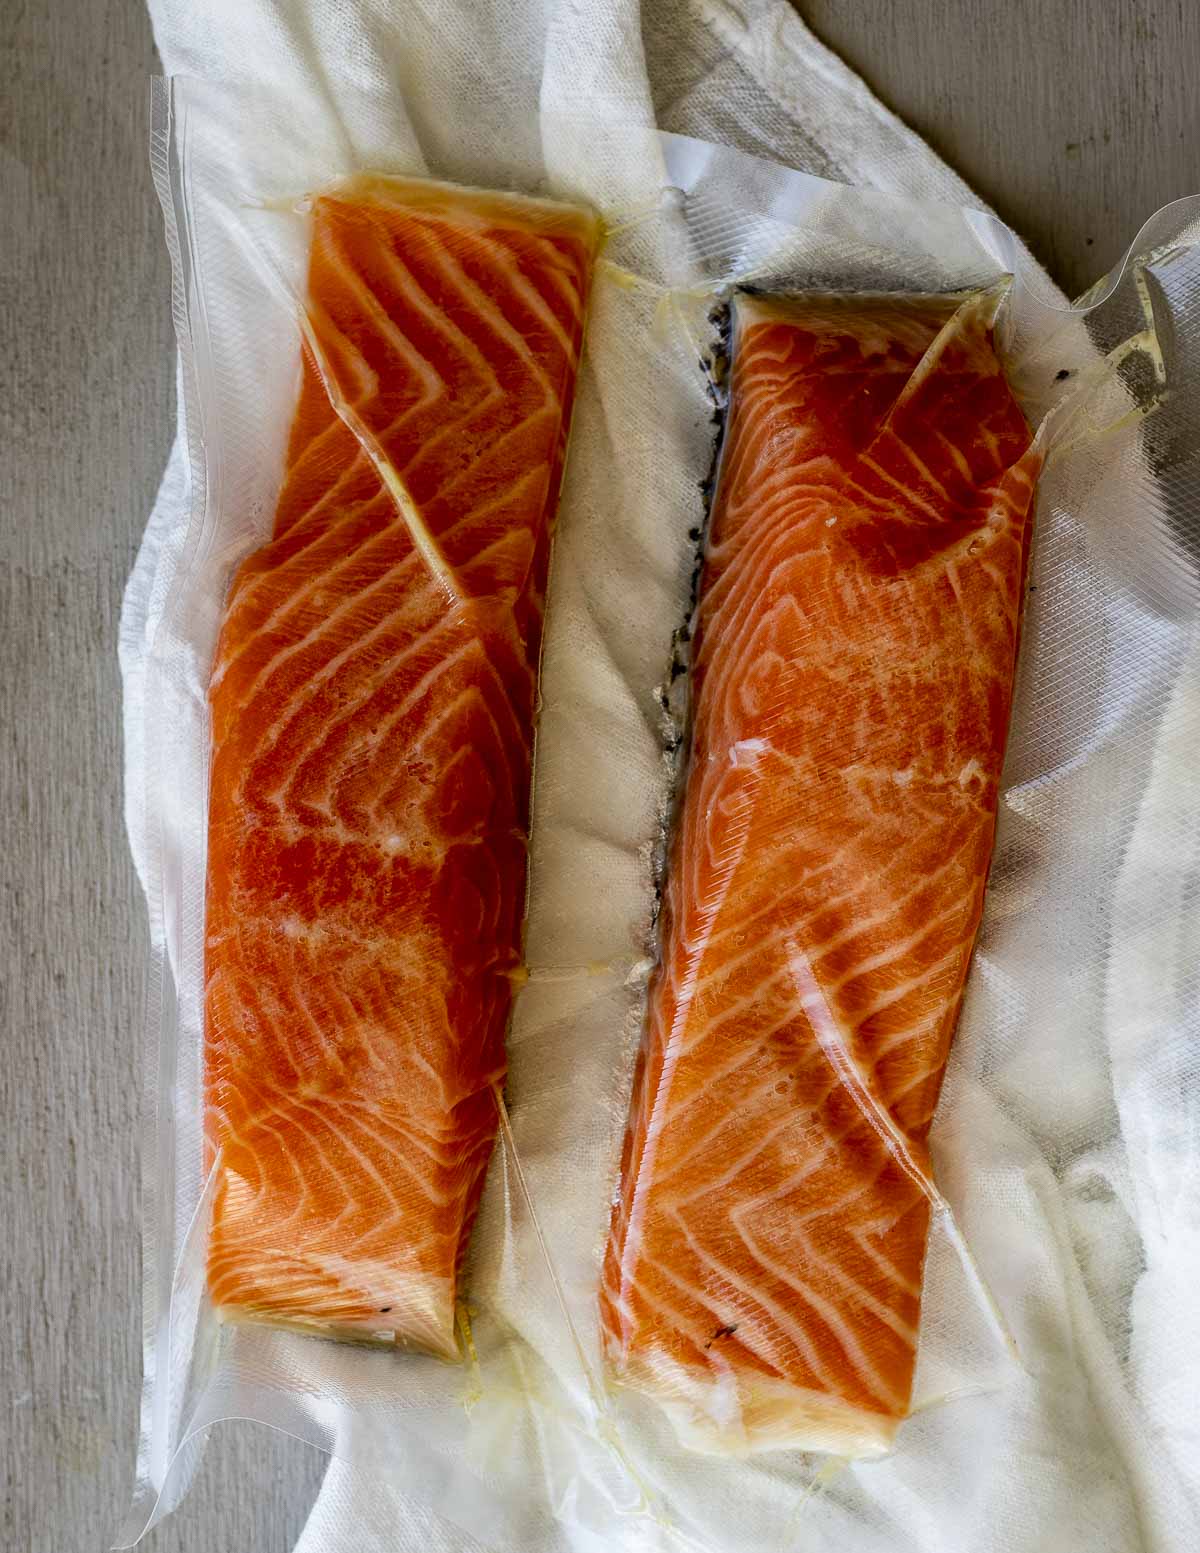 Two salmon portions sealed in a sealable bag.